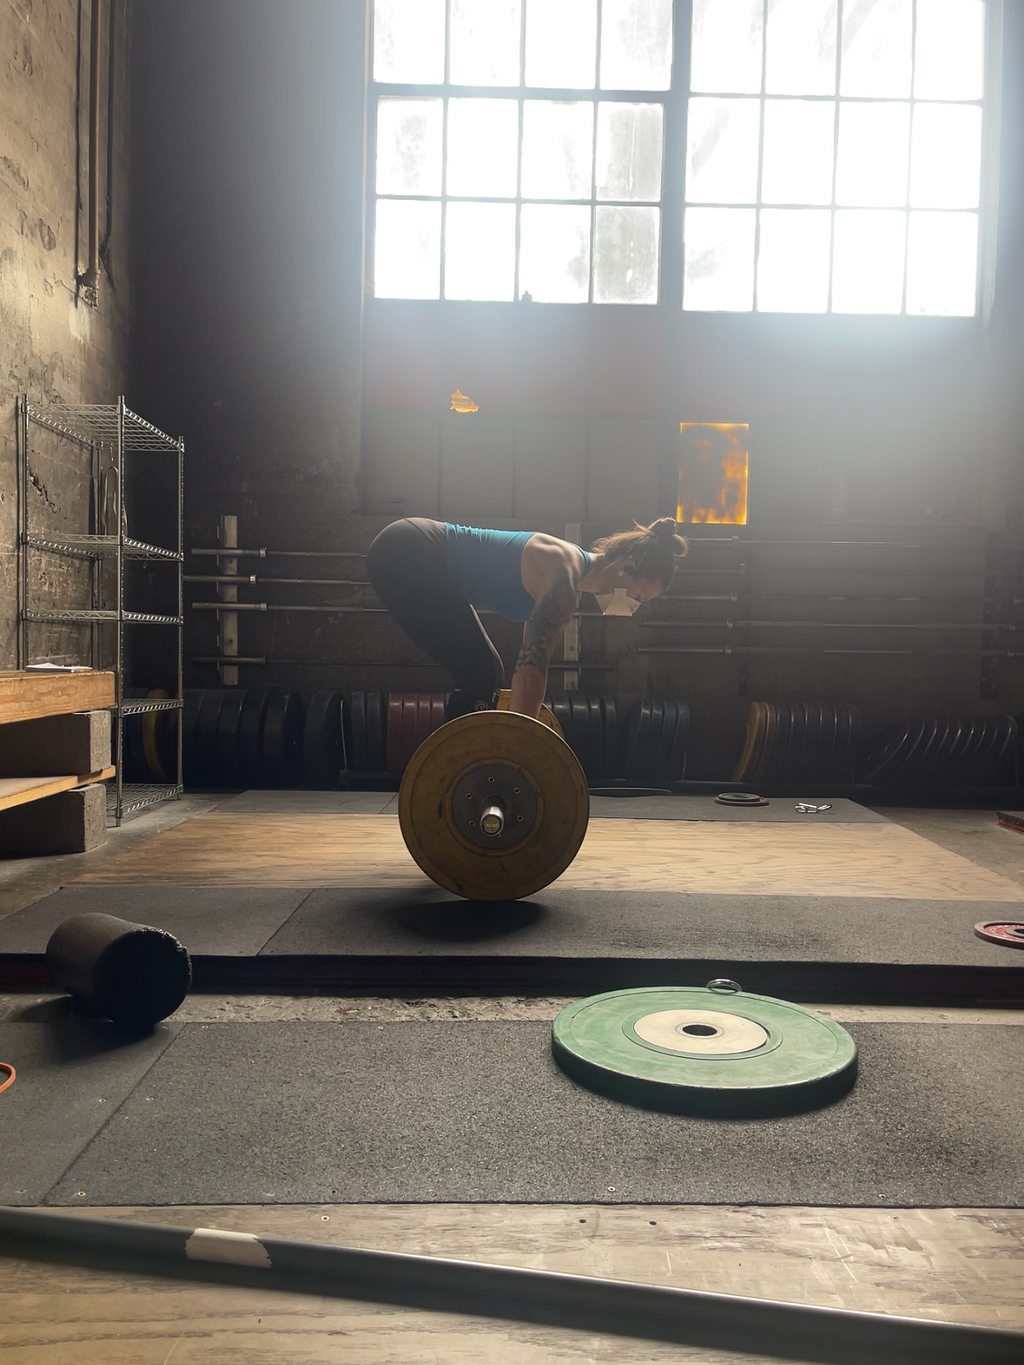 The writer, Kelsey, a white woman, is seen from the side setting up at a loaded barbell on a weightlifting platform. The overhead lights are off and natural light pours in from windows at the top of the wall in the background. She’s wearing weightlifting shoes, leggings, a tank top, and a 3M Aura respirator.